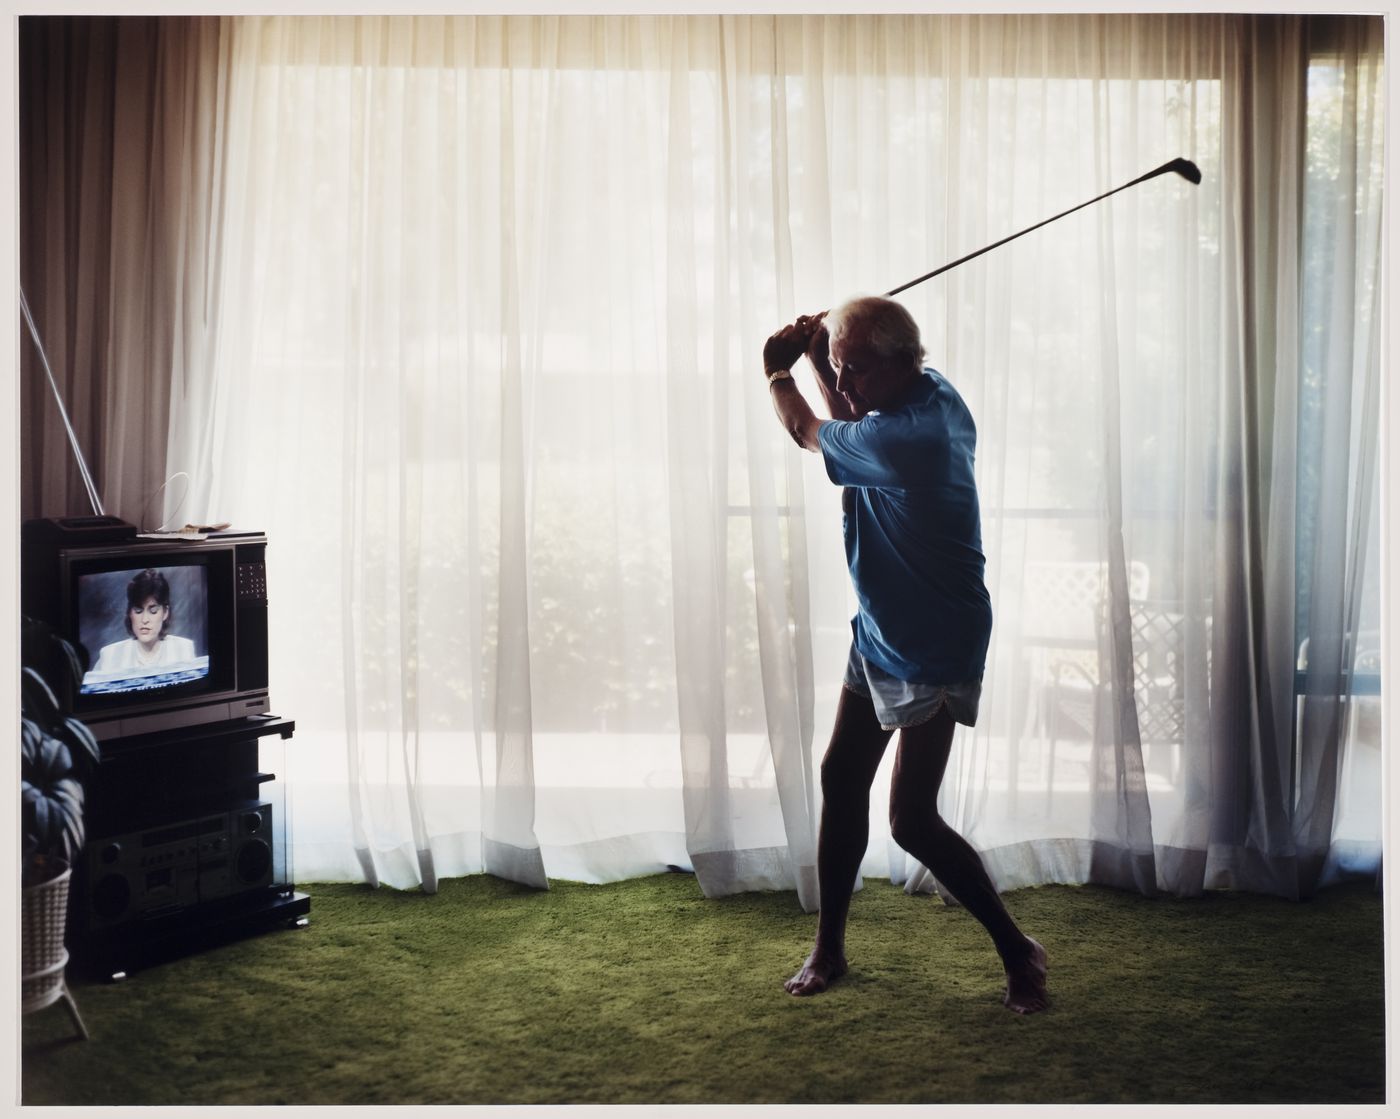 "Practicing Golf swing" from the series "Pictures From Home"